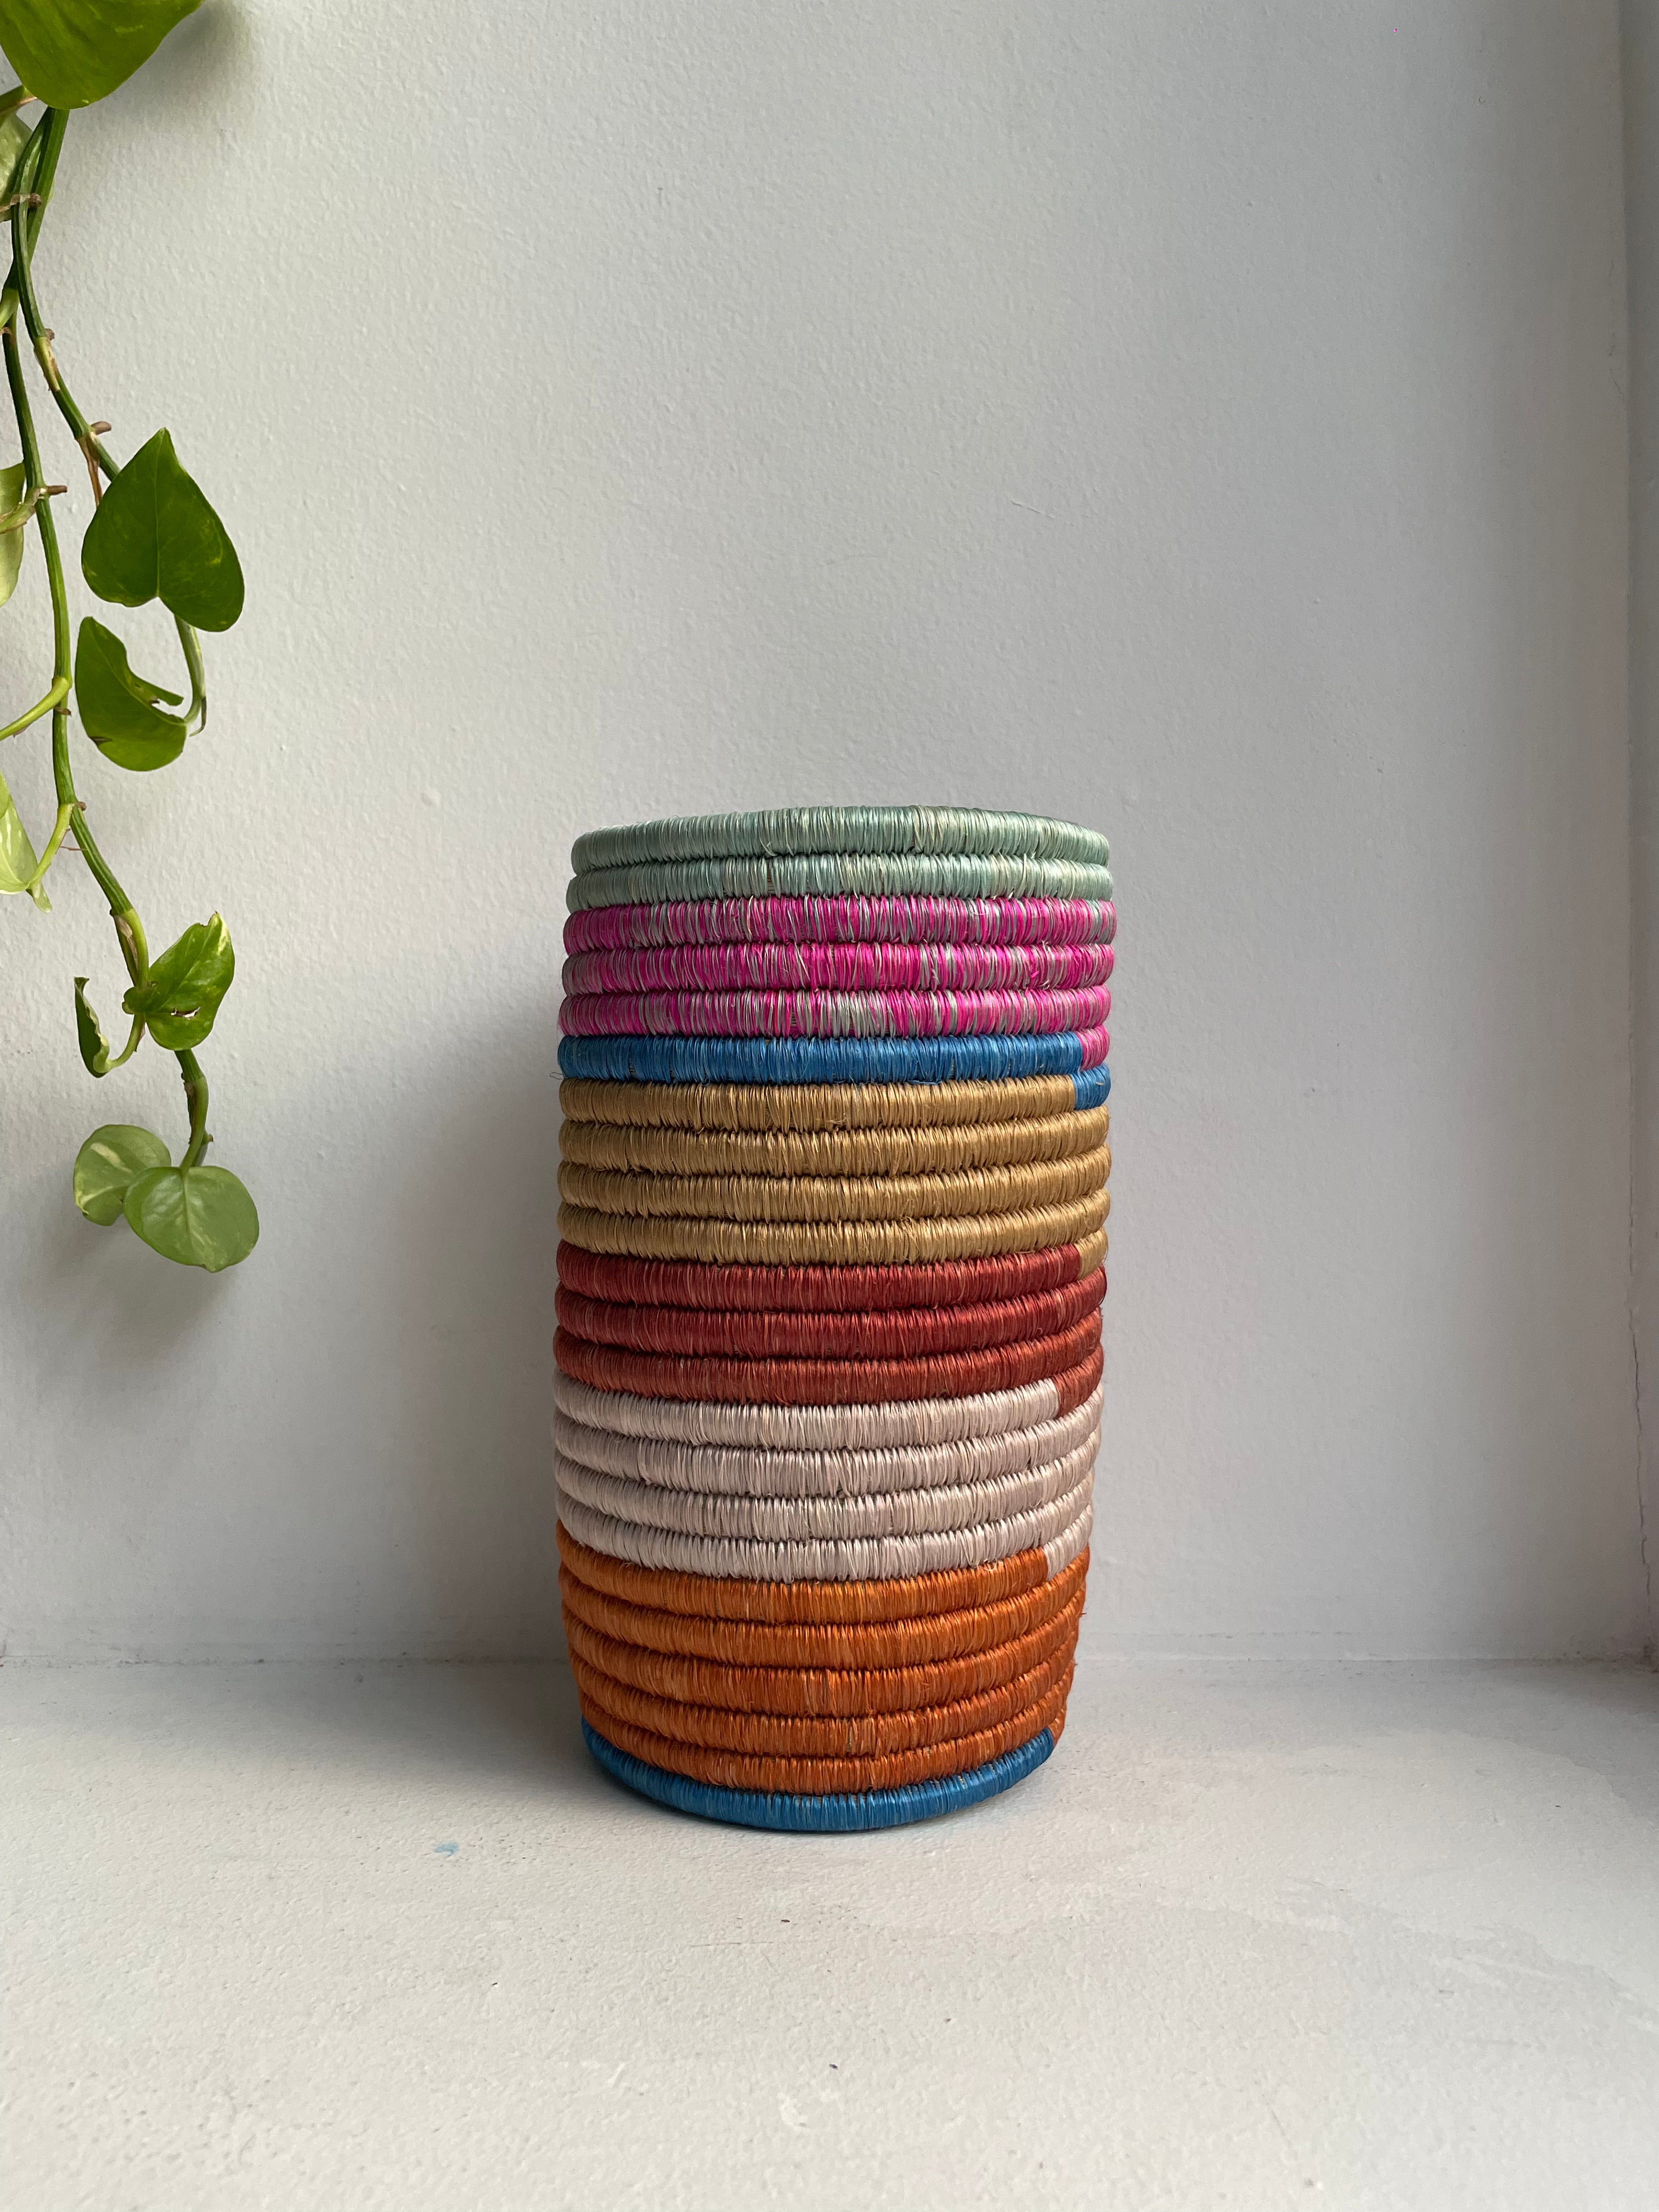 Display of multicolored striped vase